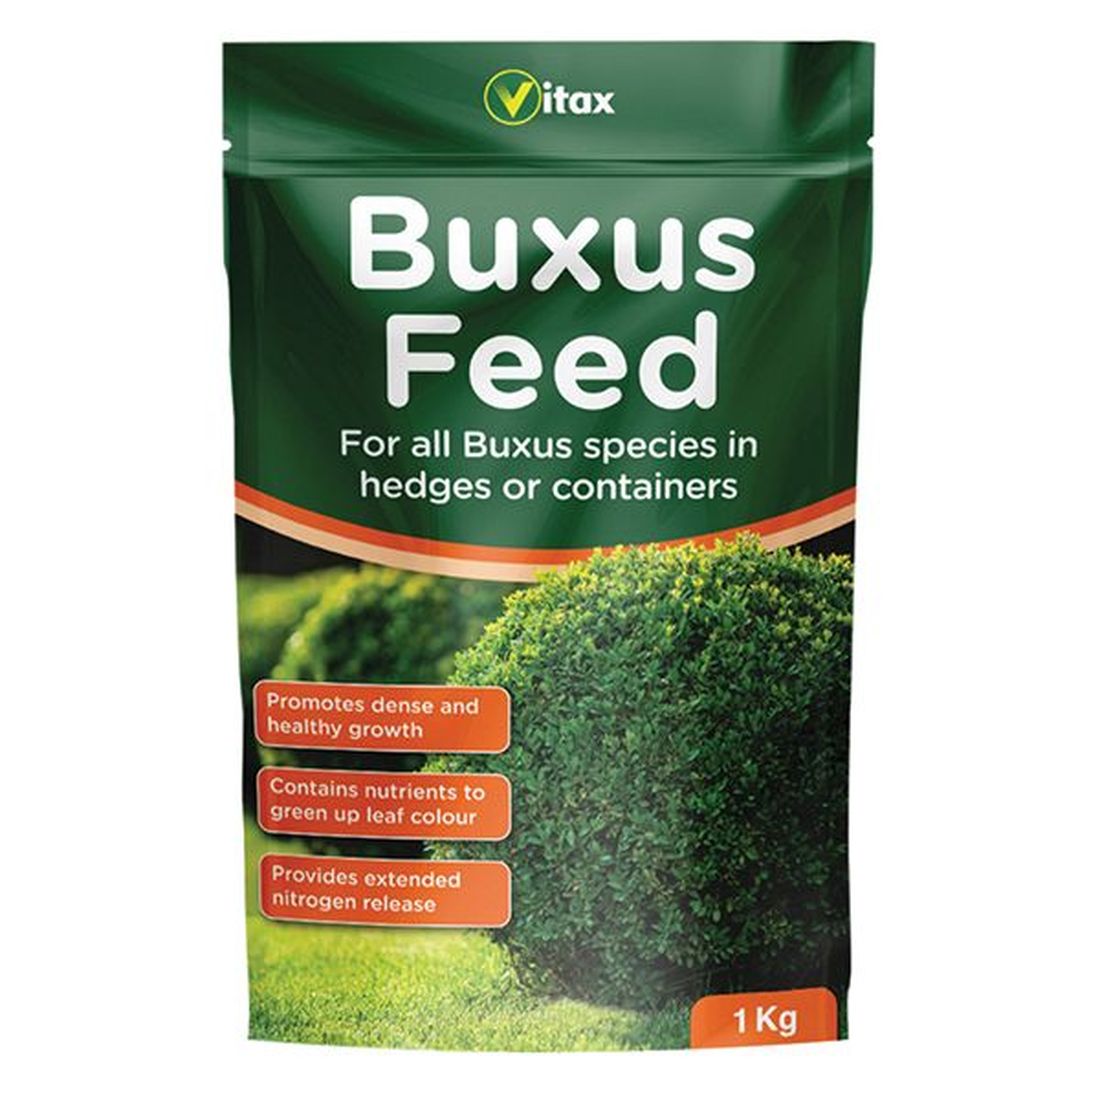 Vitax Buxus Feed 1kg Pouch              